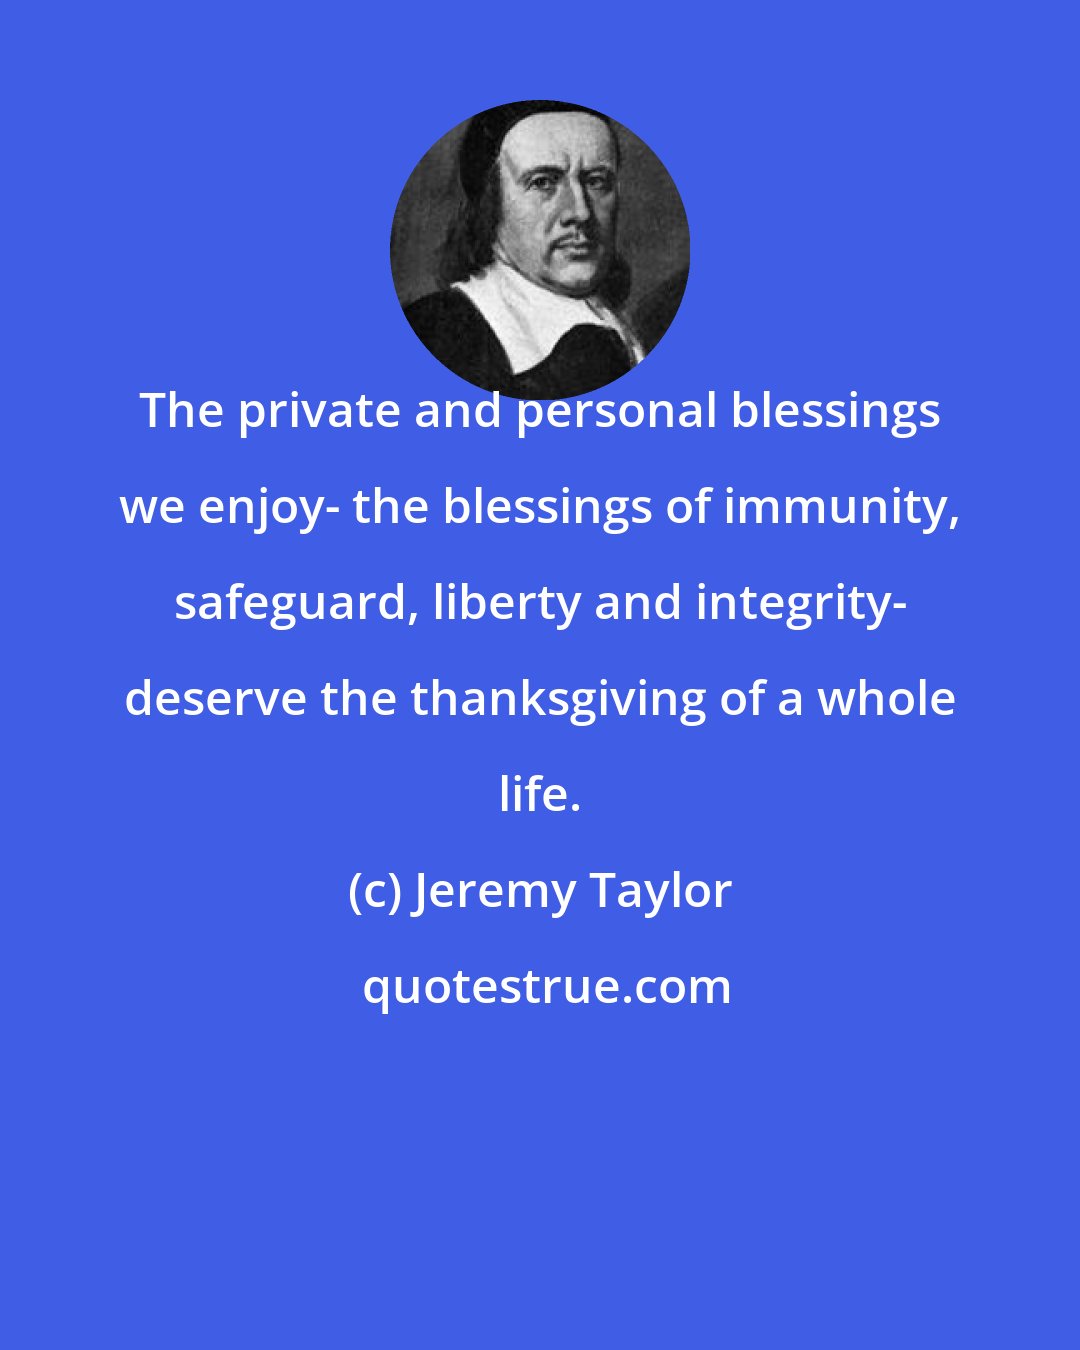 Jeremy Taylor: The private and personal blessings we enjoy- the blessings of immunity, safeguard, liberty and integrity- deserve the thanksgiving of a whole life.